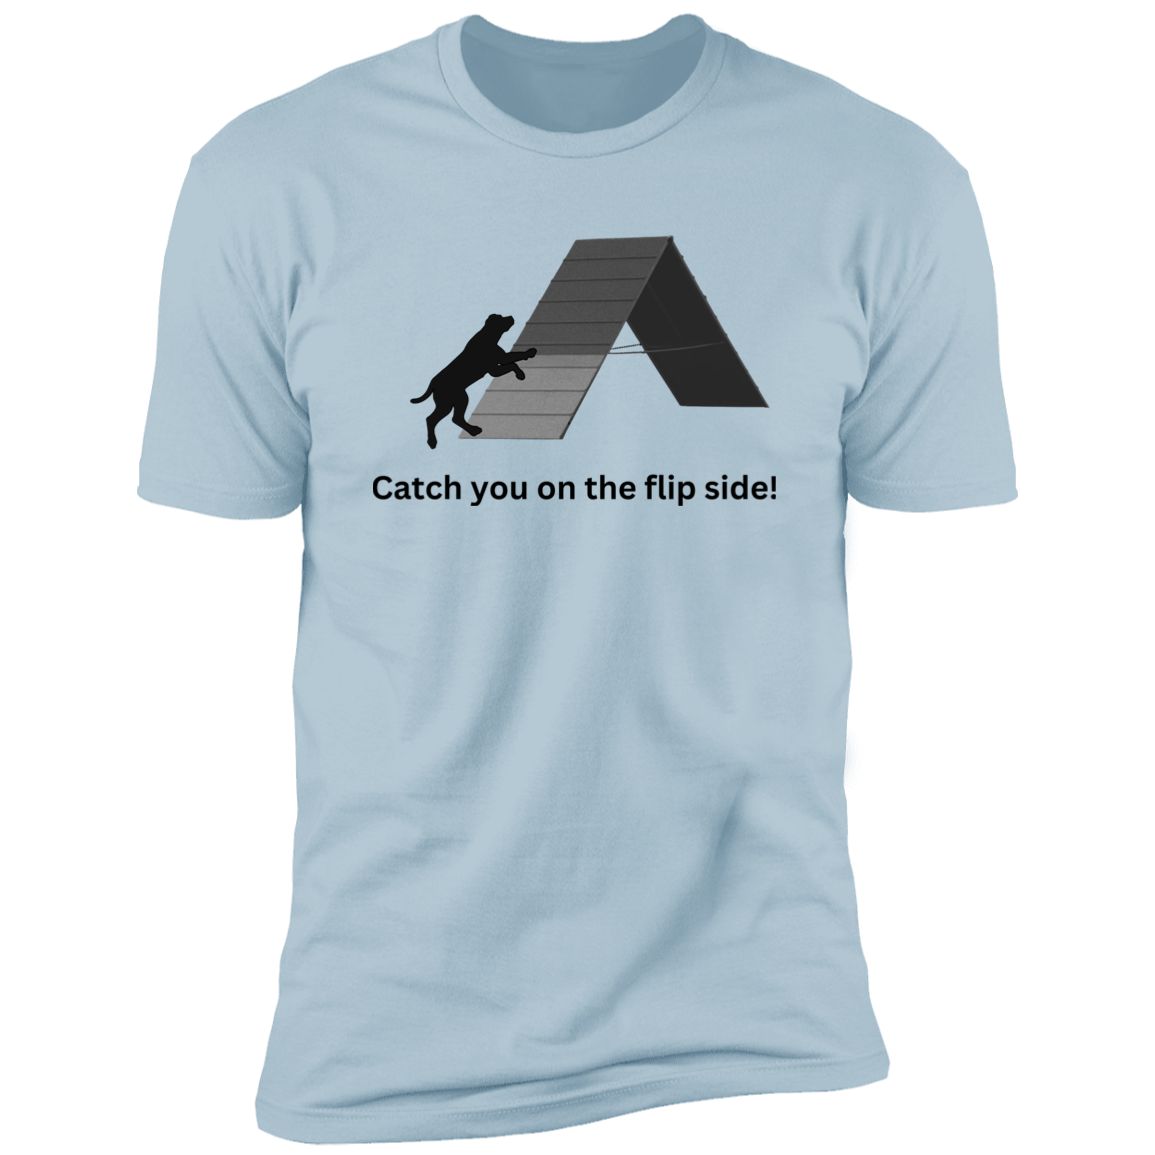 Catch You on the Flip Side T-shirt, Dog Agility Shirt for humans, in light blue